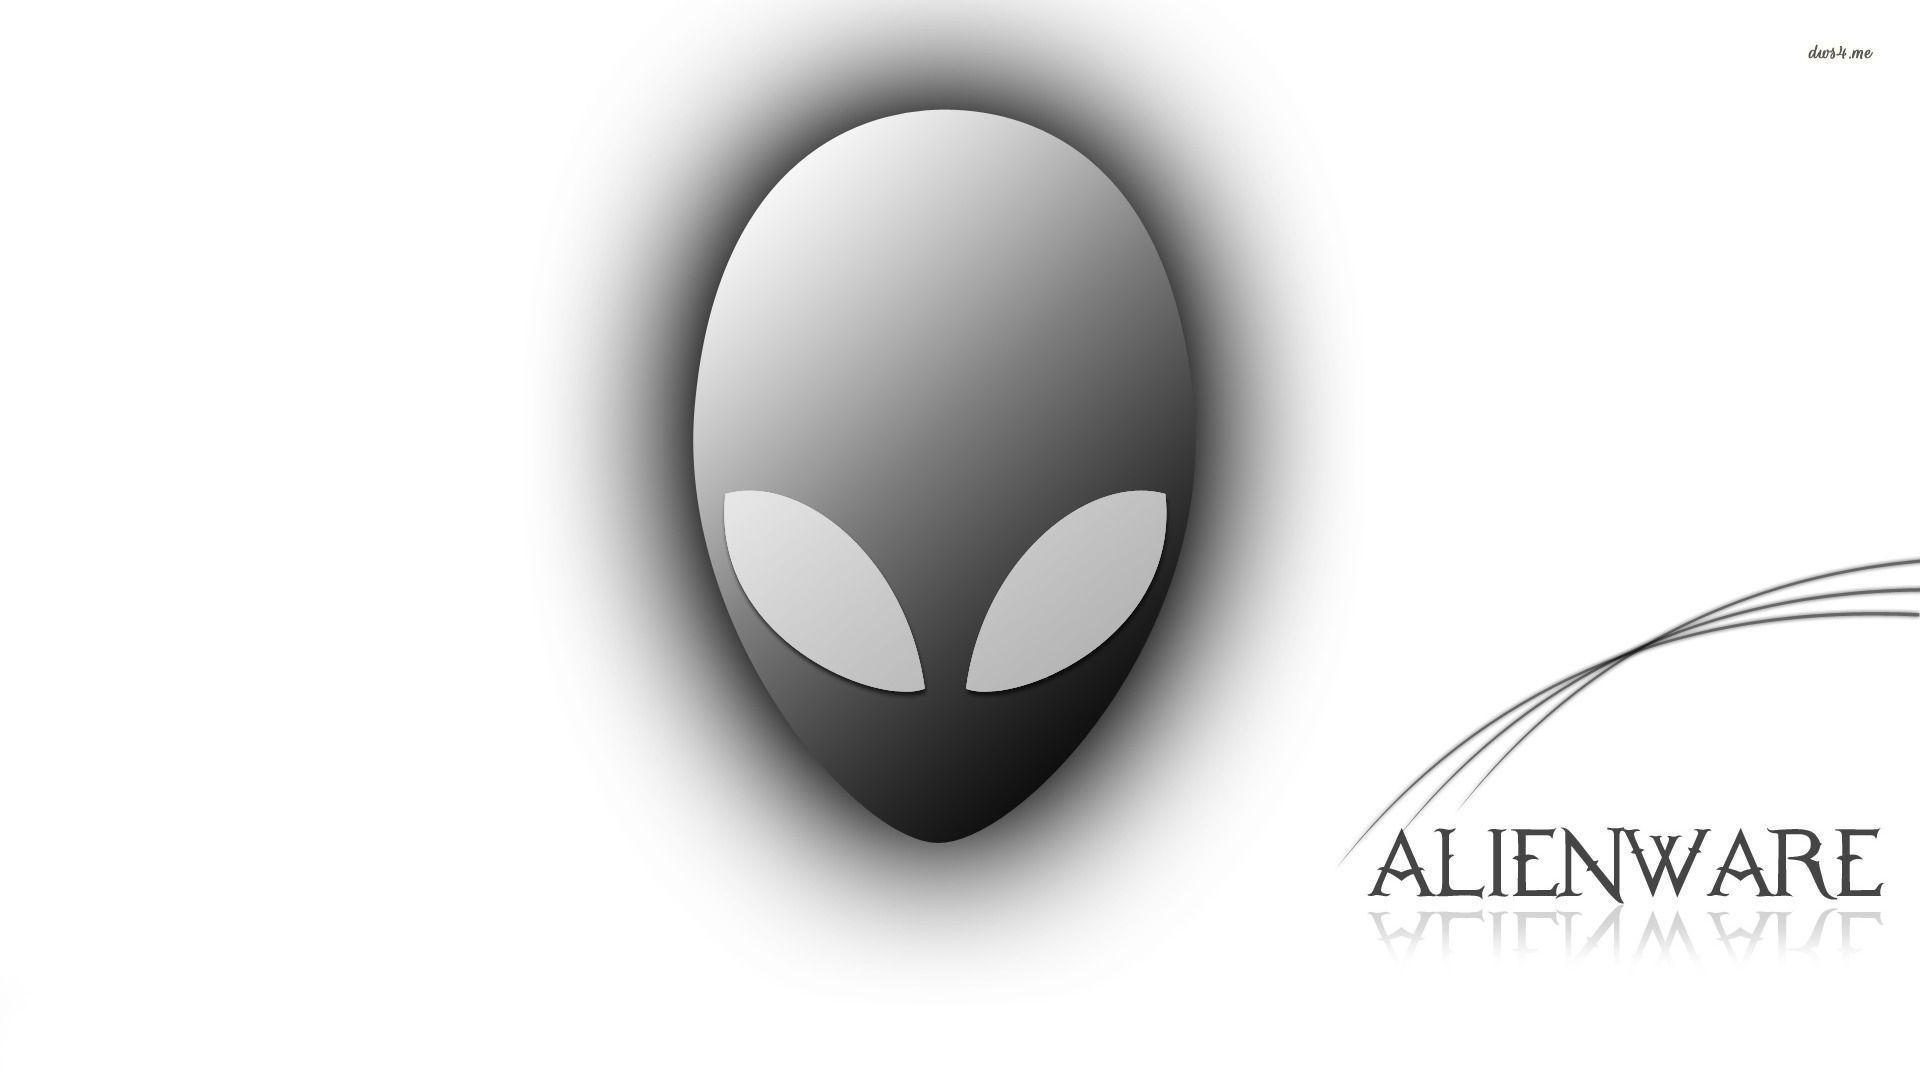 White Alienware Wallpapers